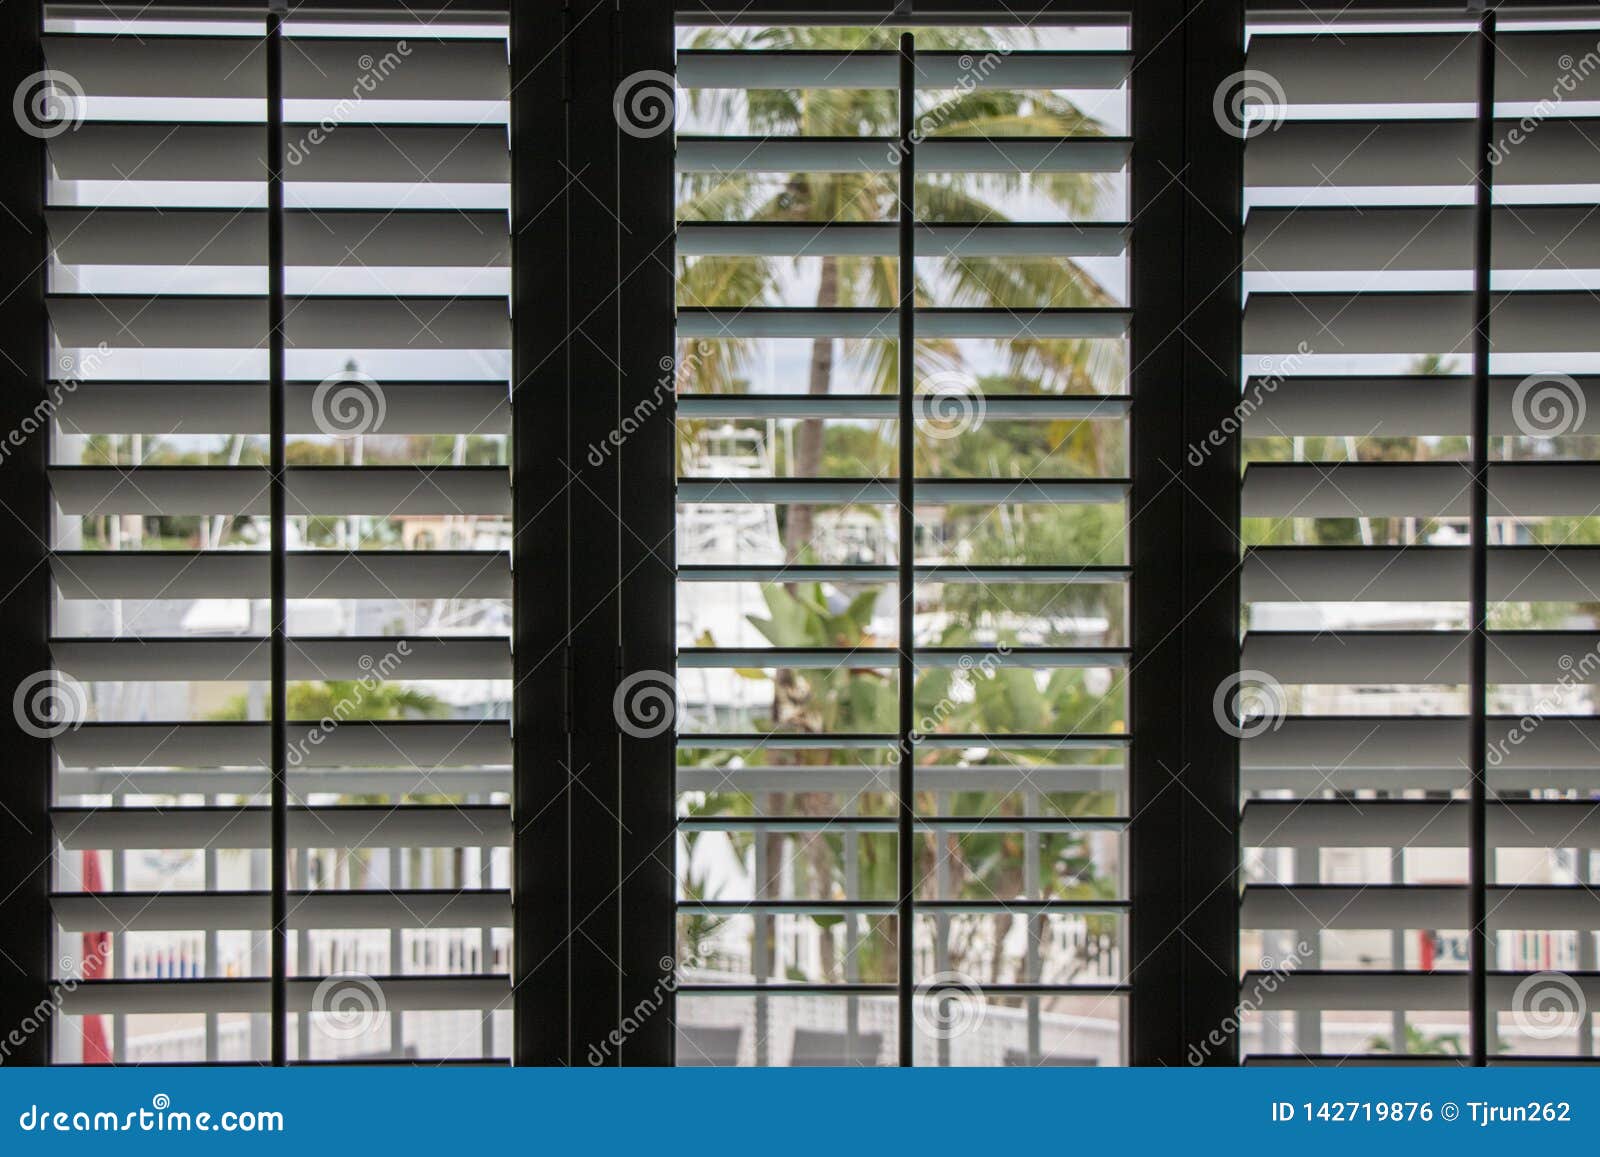 Looking Out through the Shutters Stock Photo - Image of shutters, trees ...